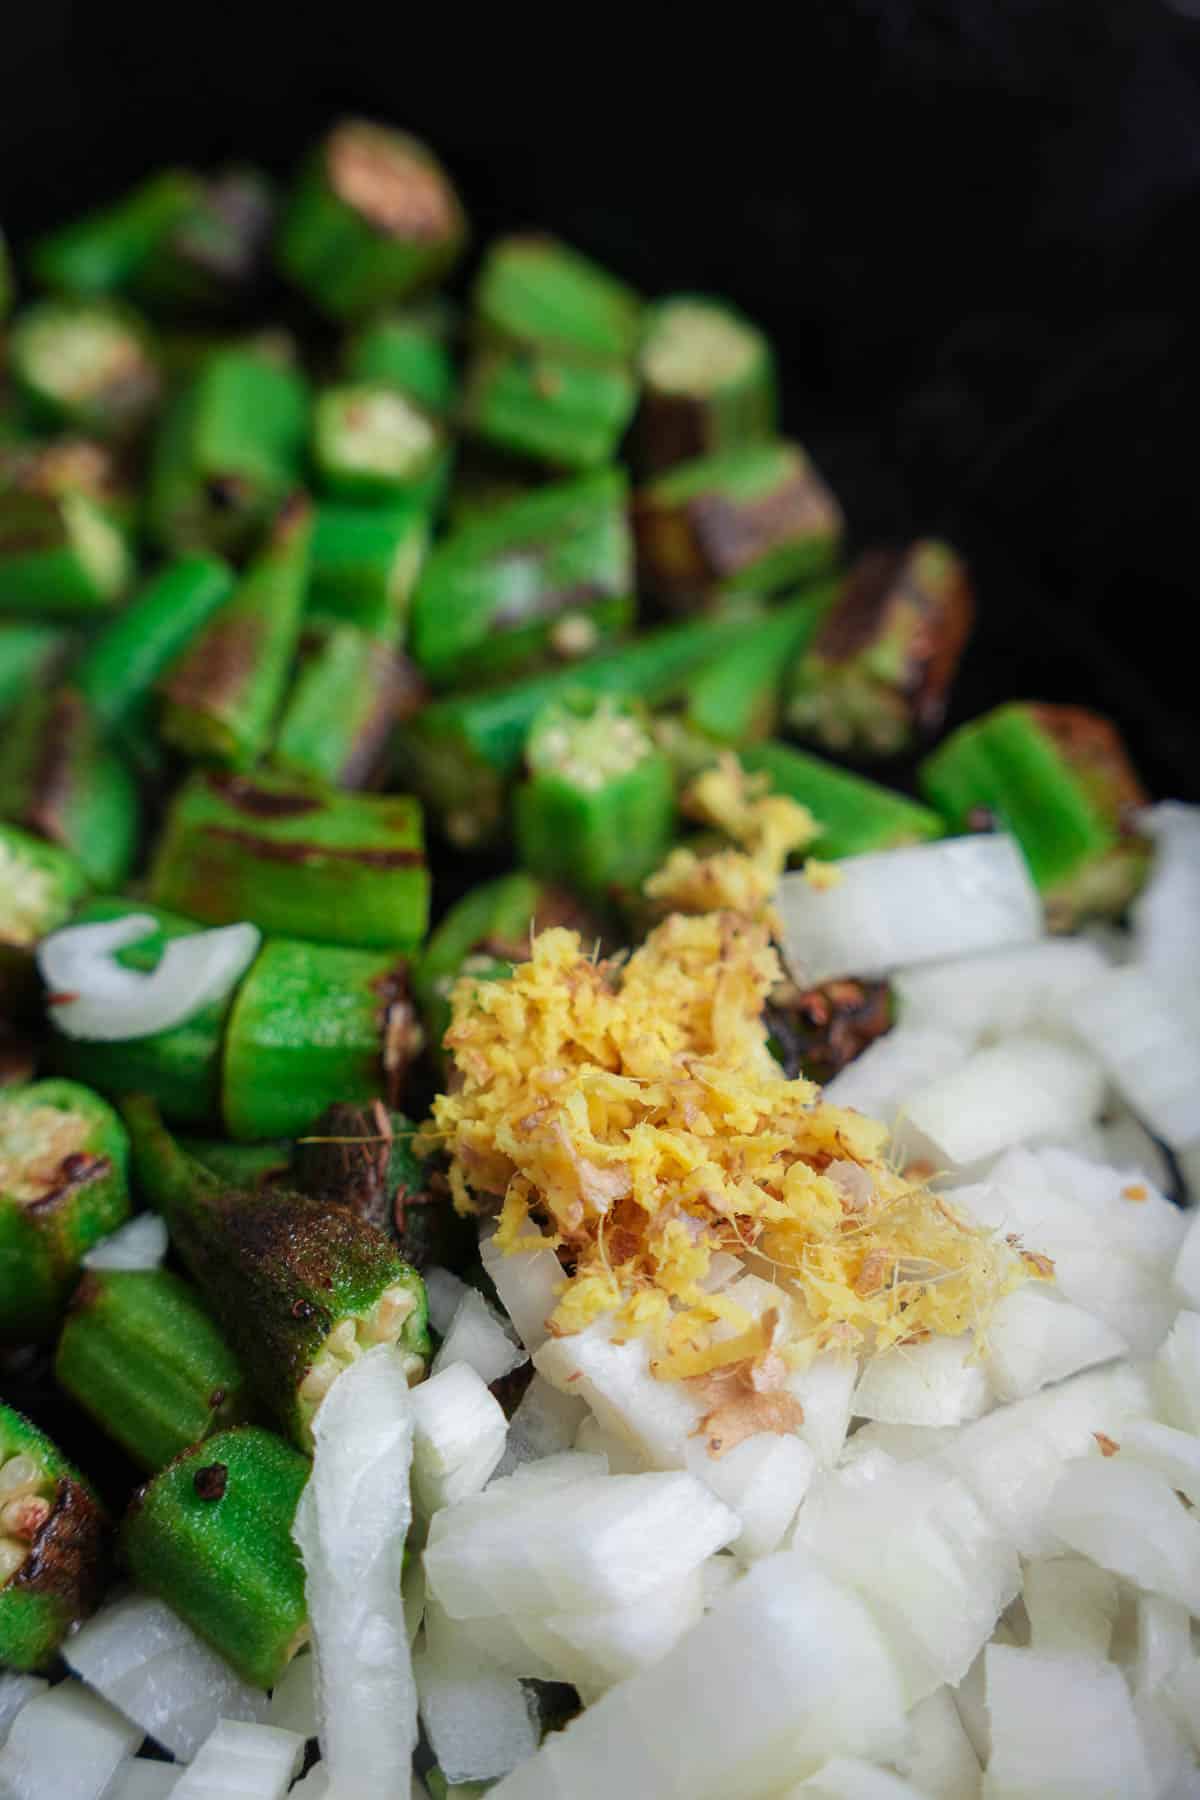 Onions and ginger are added to the sautéing okra in a cast iron pan.